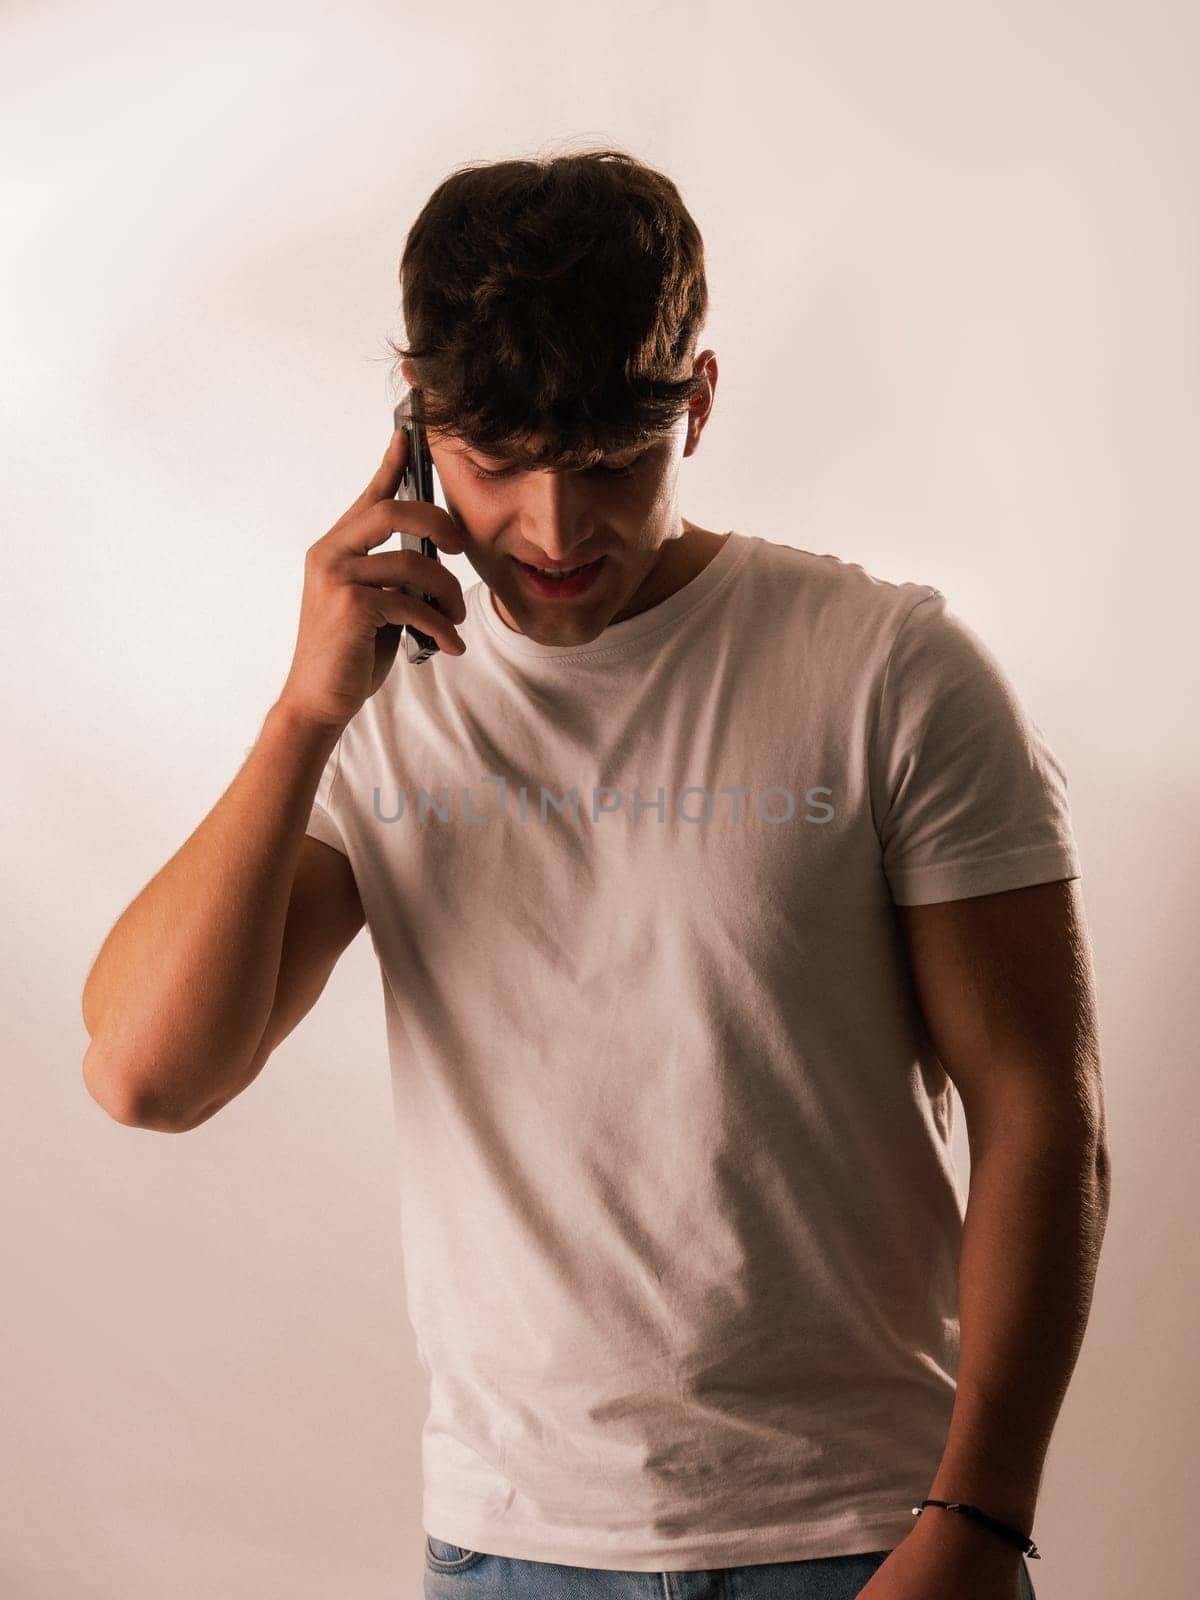 A man in a white shirt talking on a cell phone. Handsome Young Man in a White Shirt Engaged in a Phone Conversation